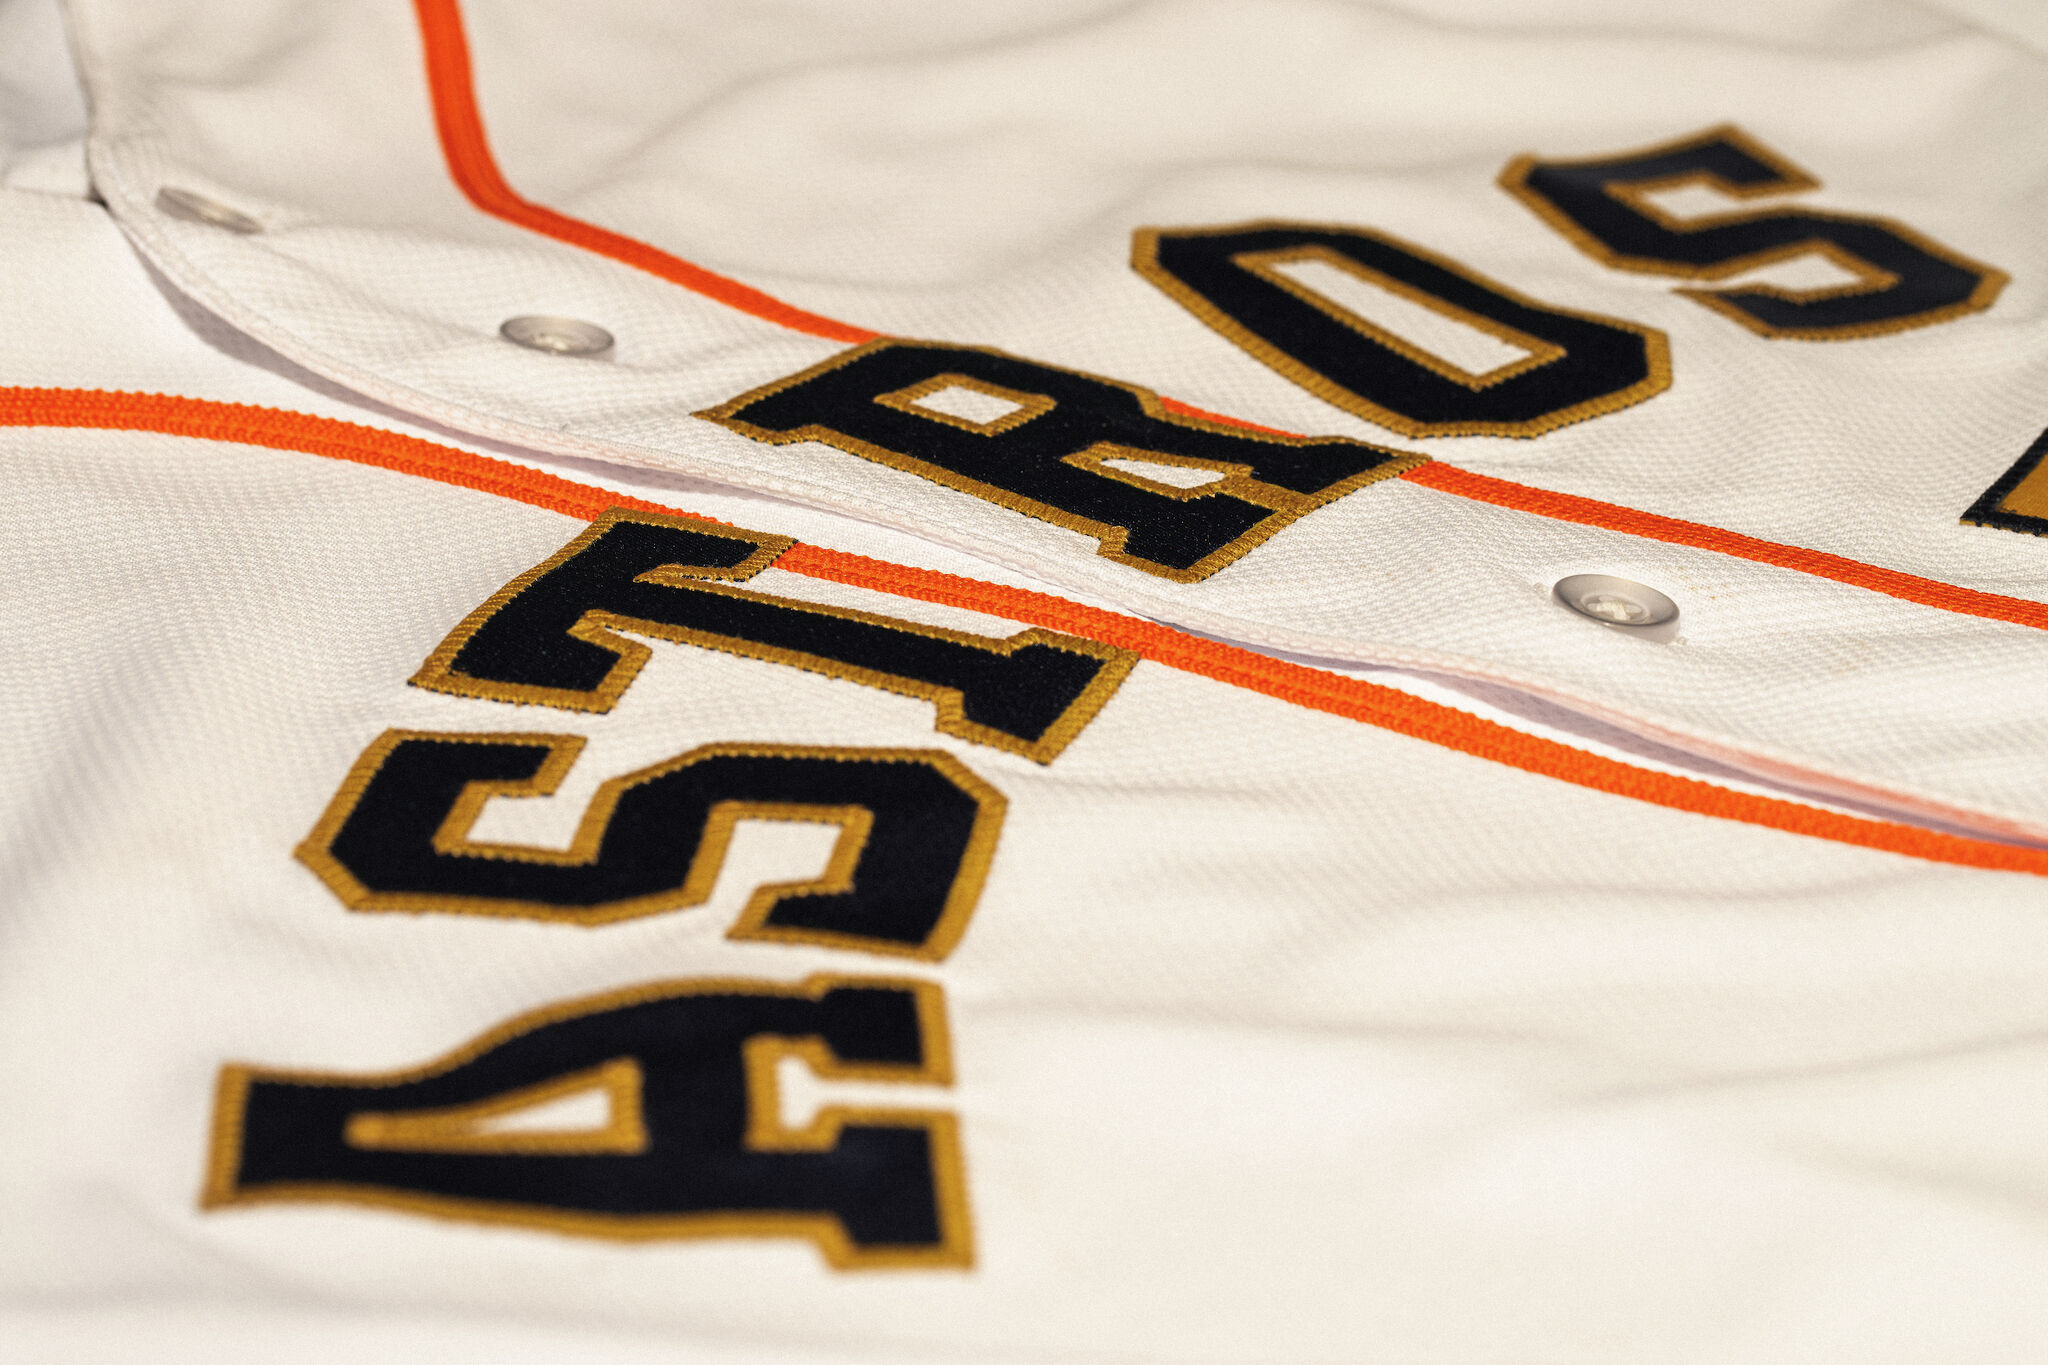 astros gold rush jersey 2023